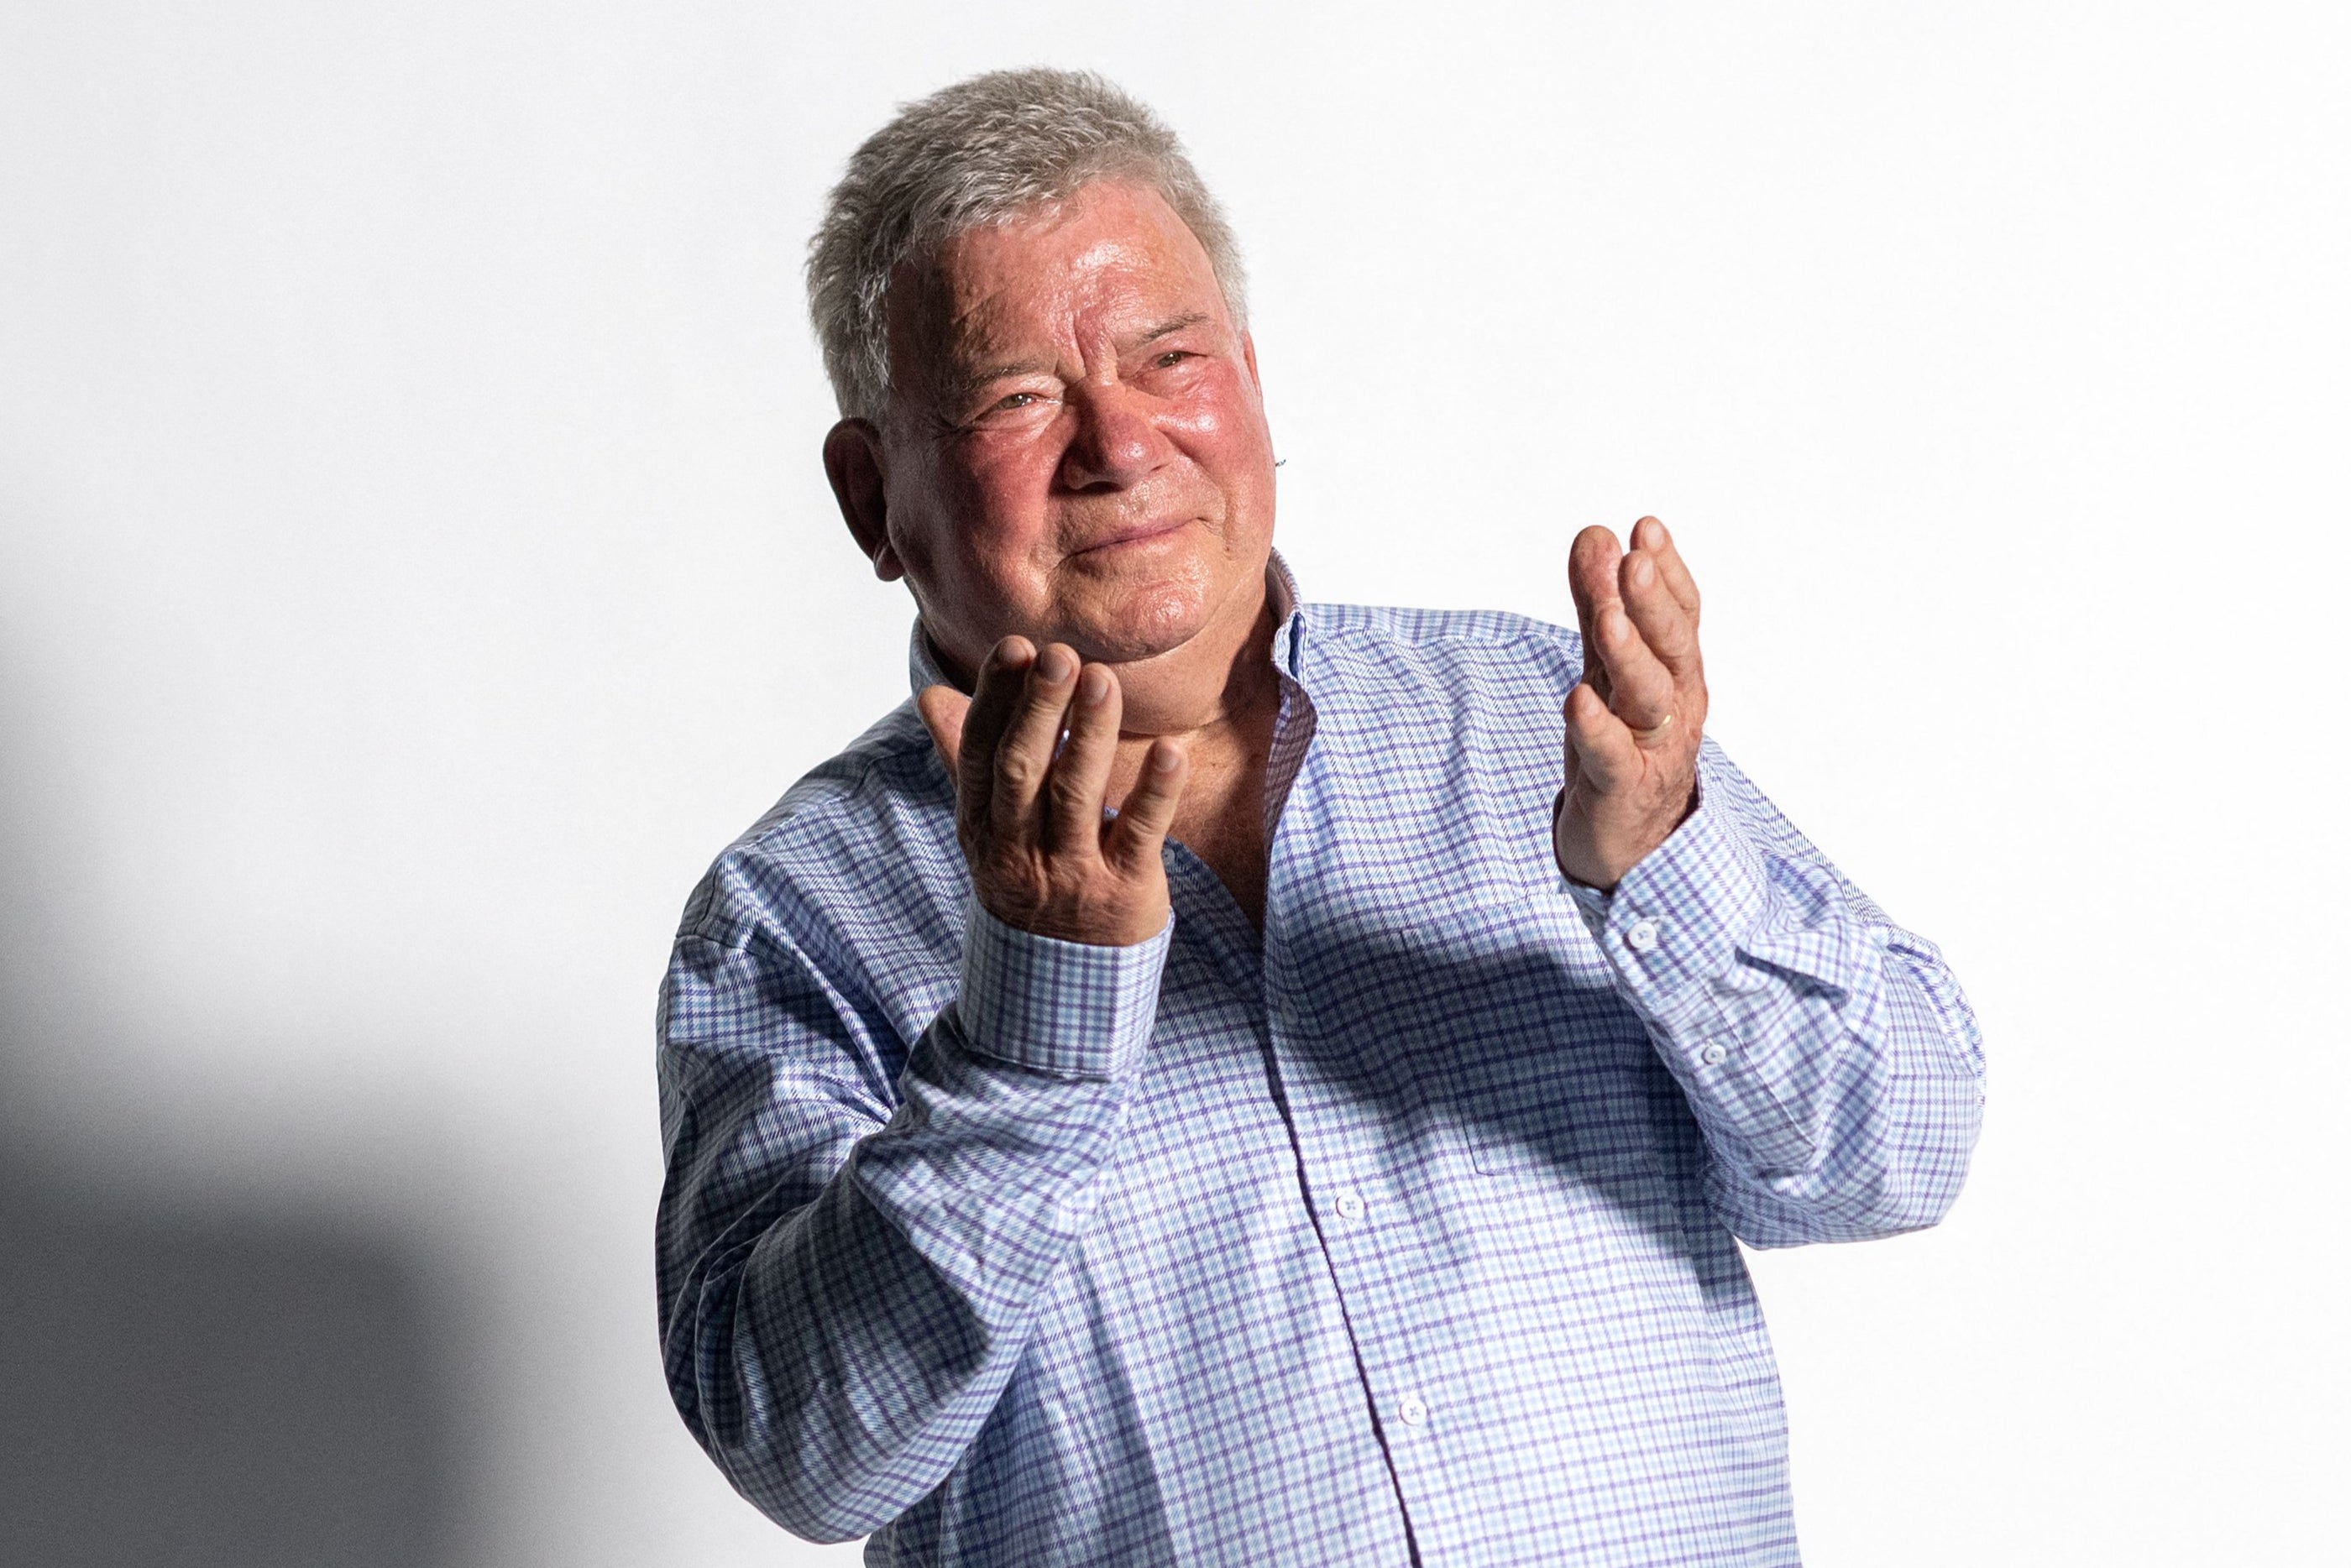 Message from the beyond: William Shatner is currently the face of the ‘grief tech’ movement